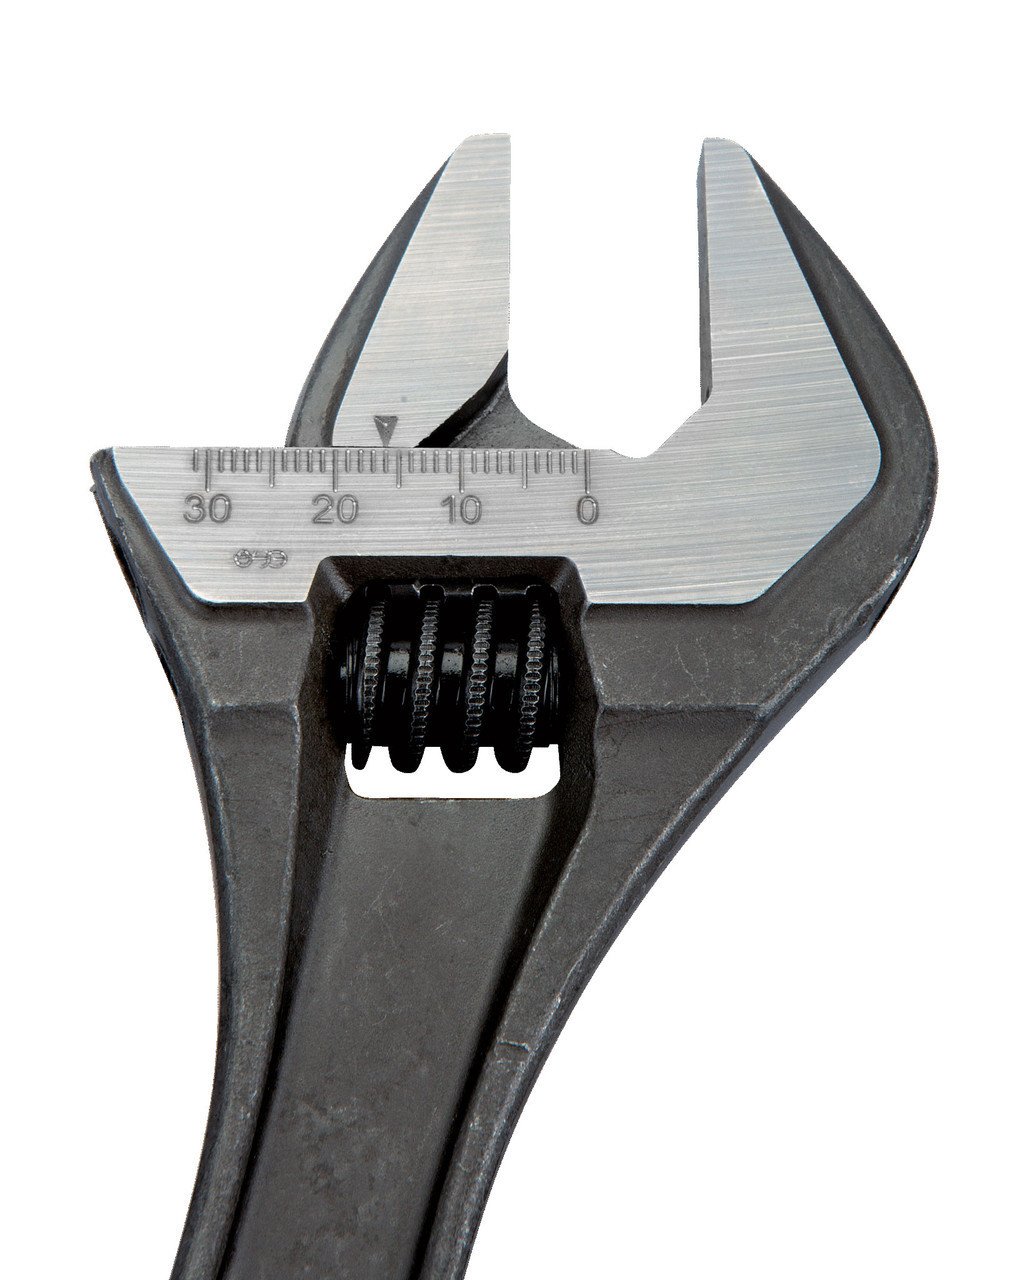 6" Williams Black Adjustable Wrench with Steel Handle- 8070 R US